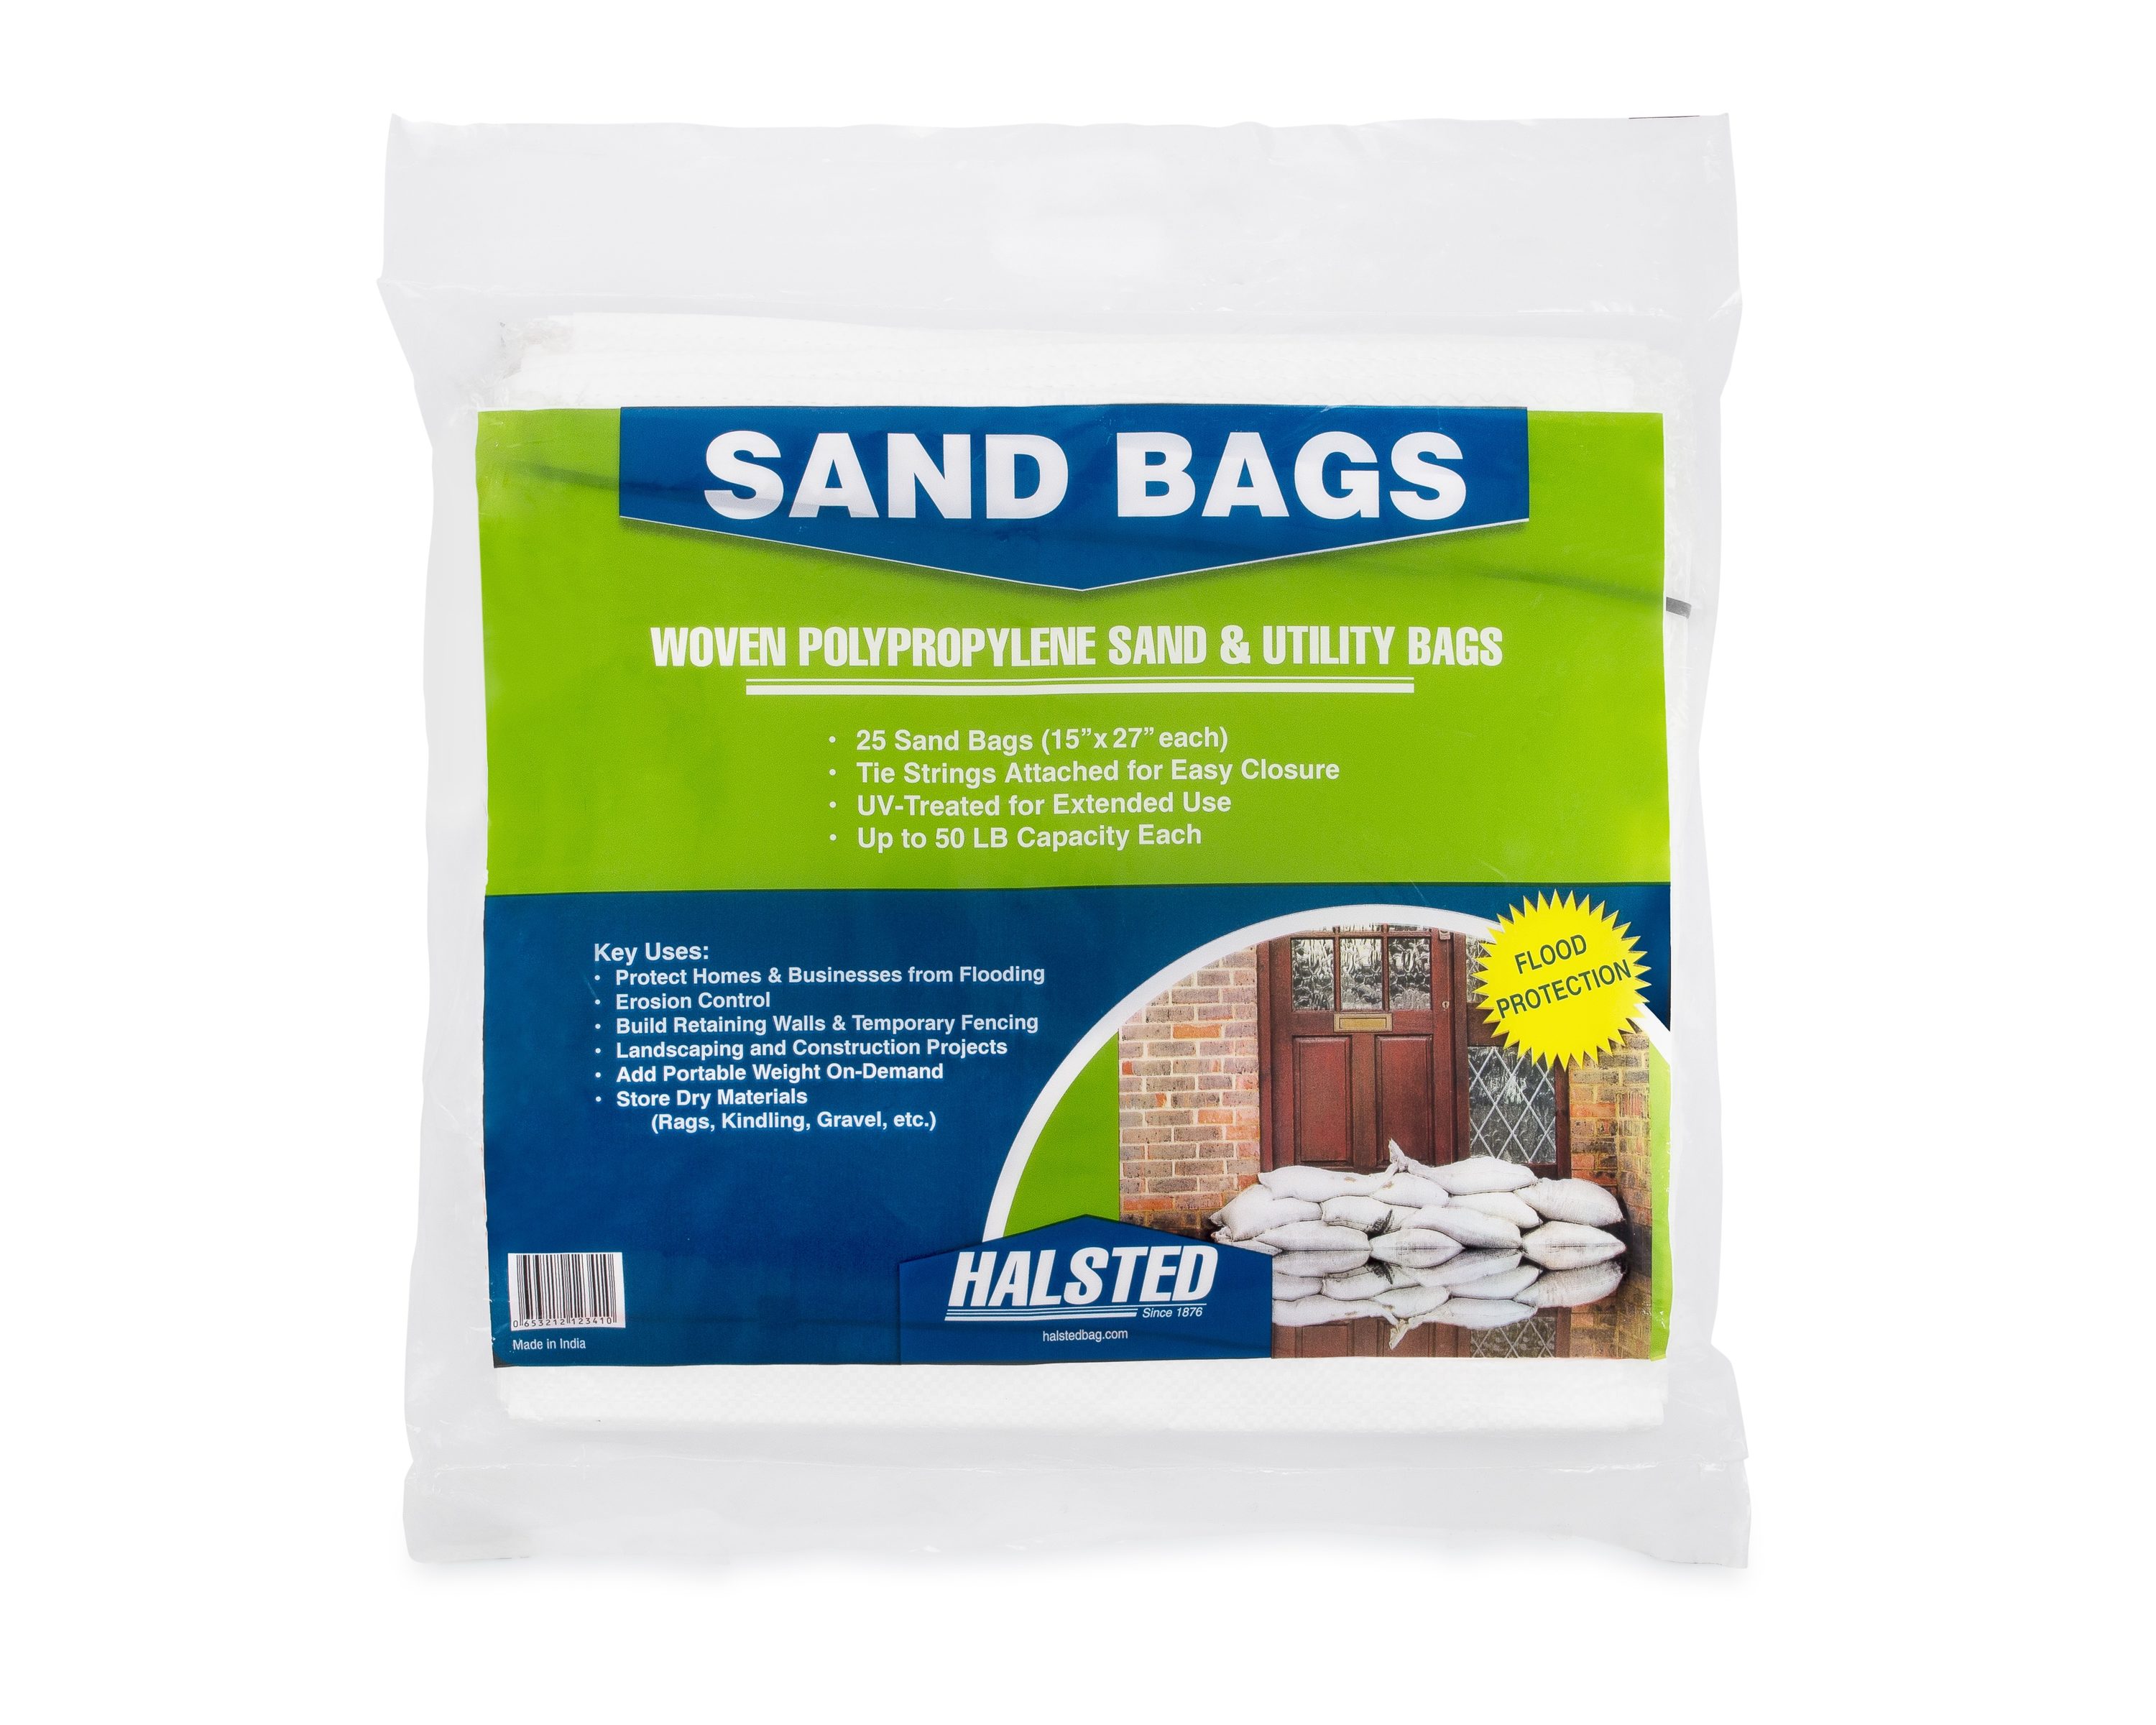 15 x 27, Heavy Duty Empty White Woven Polypropylene Sandbags for Flood Control Ties Included 10 Pack 